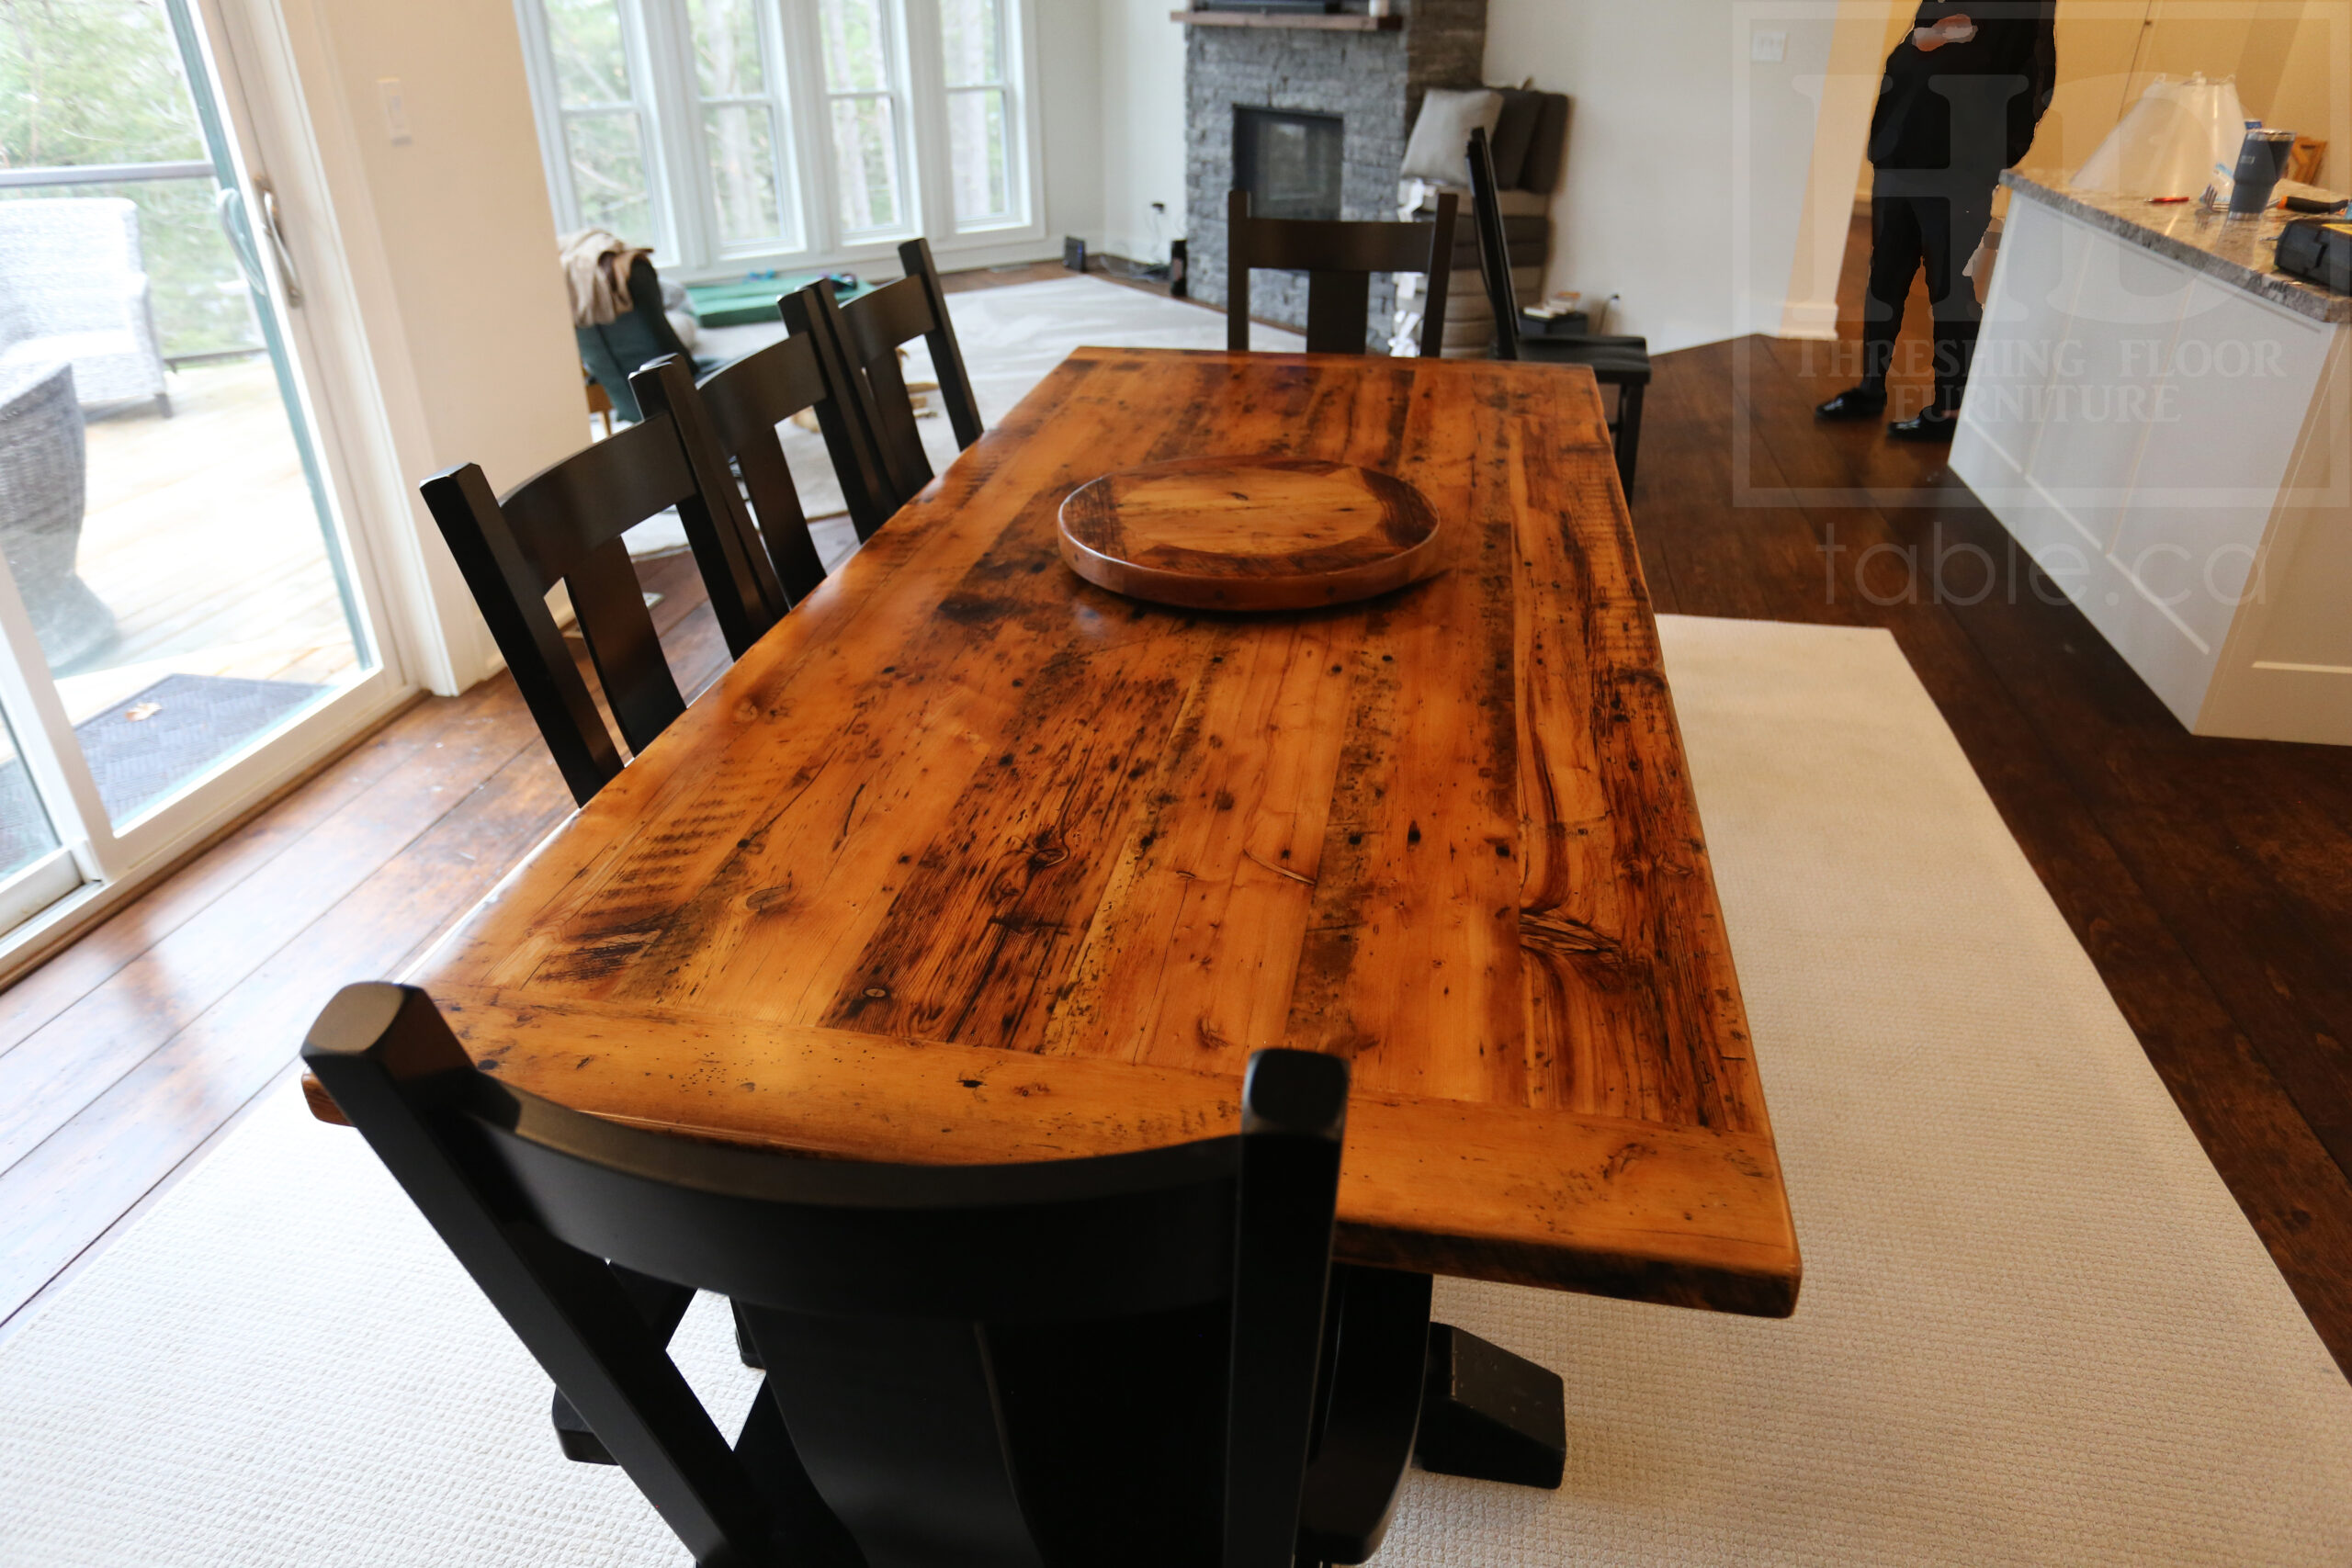 8’ Reclaimed Ontario Barnwood Table we made for a Parry Sound, Ontario home – 42” wide – Sawbuck Base - Old Growth Hemlock Threshing Floor Construction - Original edges & distressing maintained – Bread Edge Board Ends – Premium epoxy + satin polyurethane finish – Solid Black Painted Base – 8 Plank Back Chairs / Wormy Maple / Painted Solid Black / Polyurethane clearcoat finish – 20” Round Lazy Susan - www.table.ca